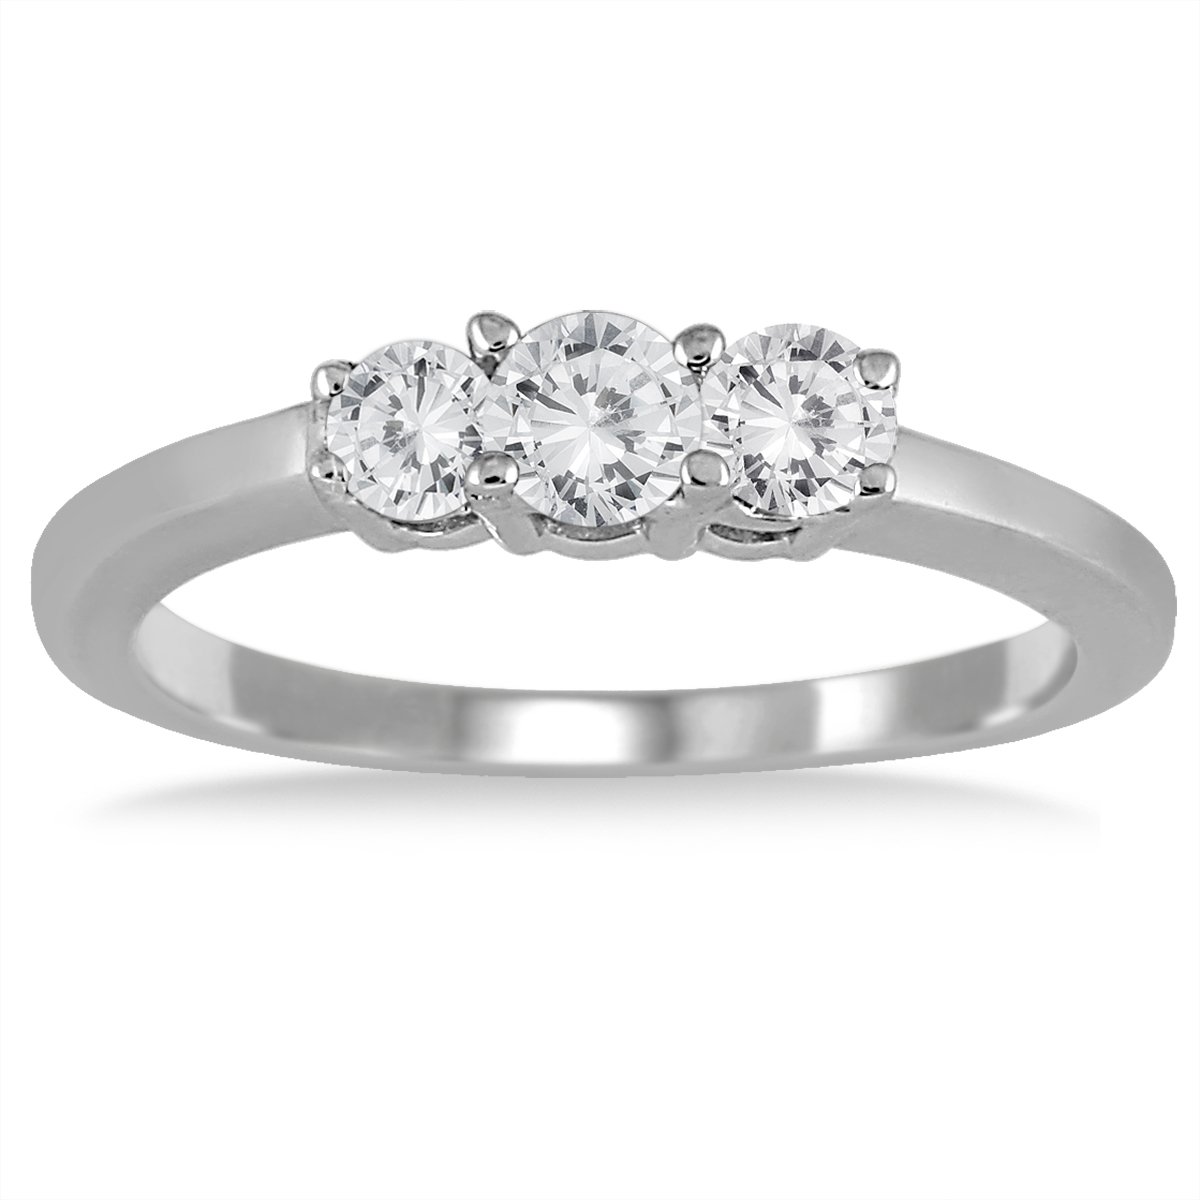 Image of 1/2 Carat Three Stone Diamond Ring in925 Sterling Silver